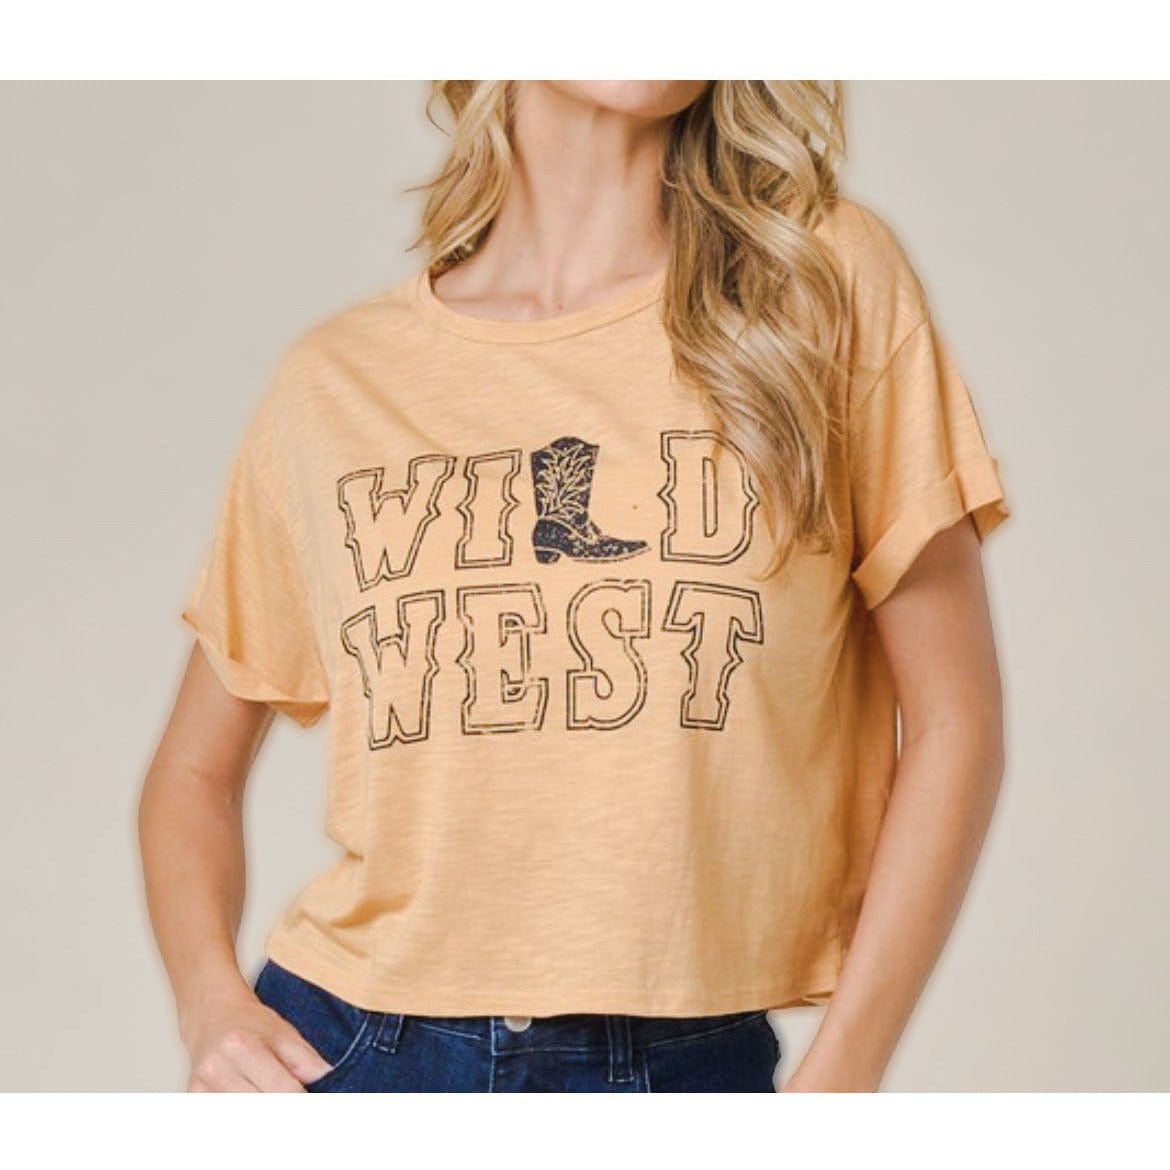 Wild West Graphic Tee | Western T-shirt | Cropped Graphic Tee Graphic T-shirt TheFringeCultureCollective